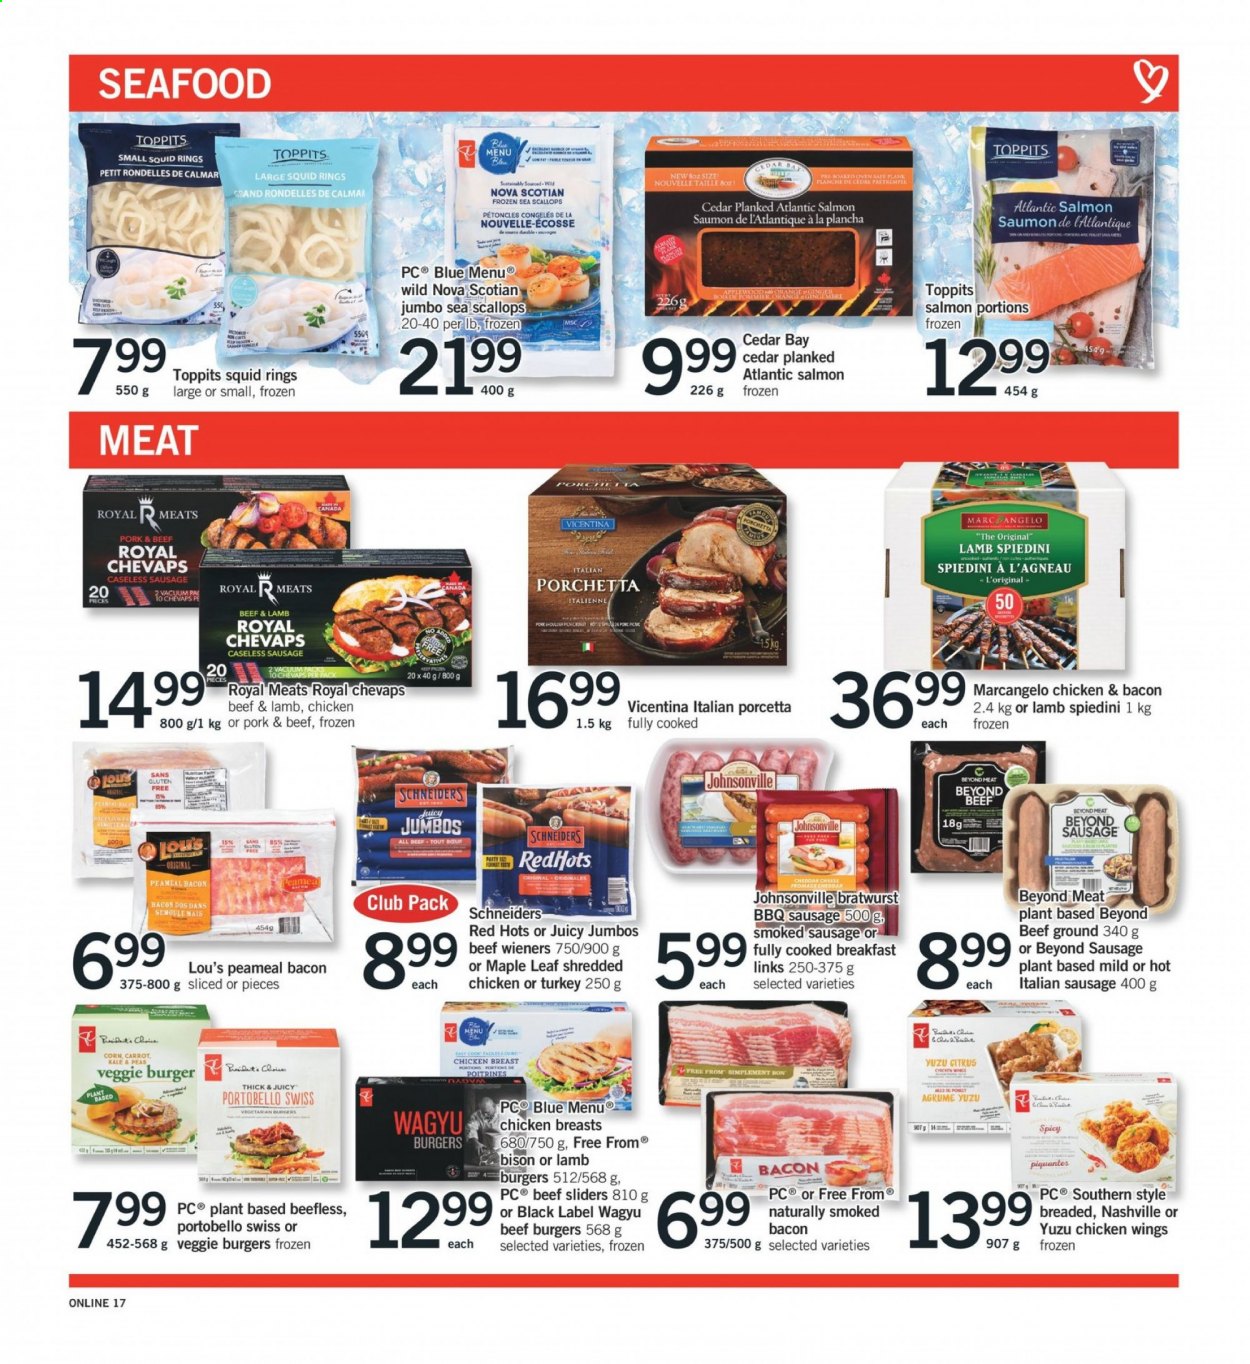 thumbnail - Fortinos Flyer - May 06, 2021 - May 12, 2021 - Sales products - portobello mushrooms, corn, salmon, scallops, squid, seafood, squid rings, veggie burger, beef burger, bacon, Johnsonville, bratwurst, sausage, smoked sausage, italian sausage, cheddar, cheese, chicken wings, chicken, WD, oven. Page 8.